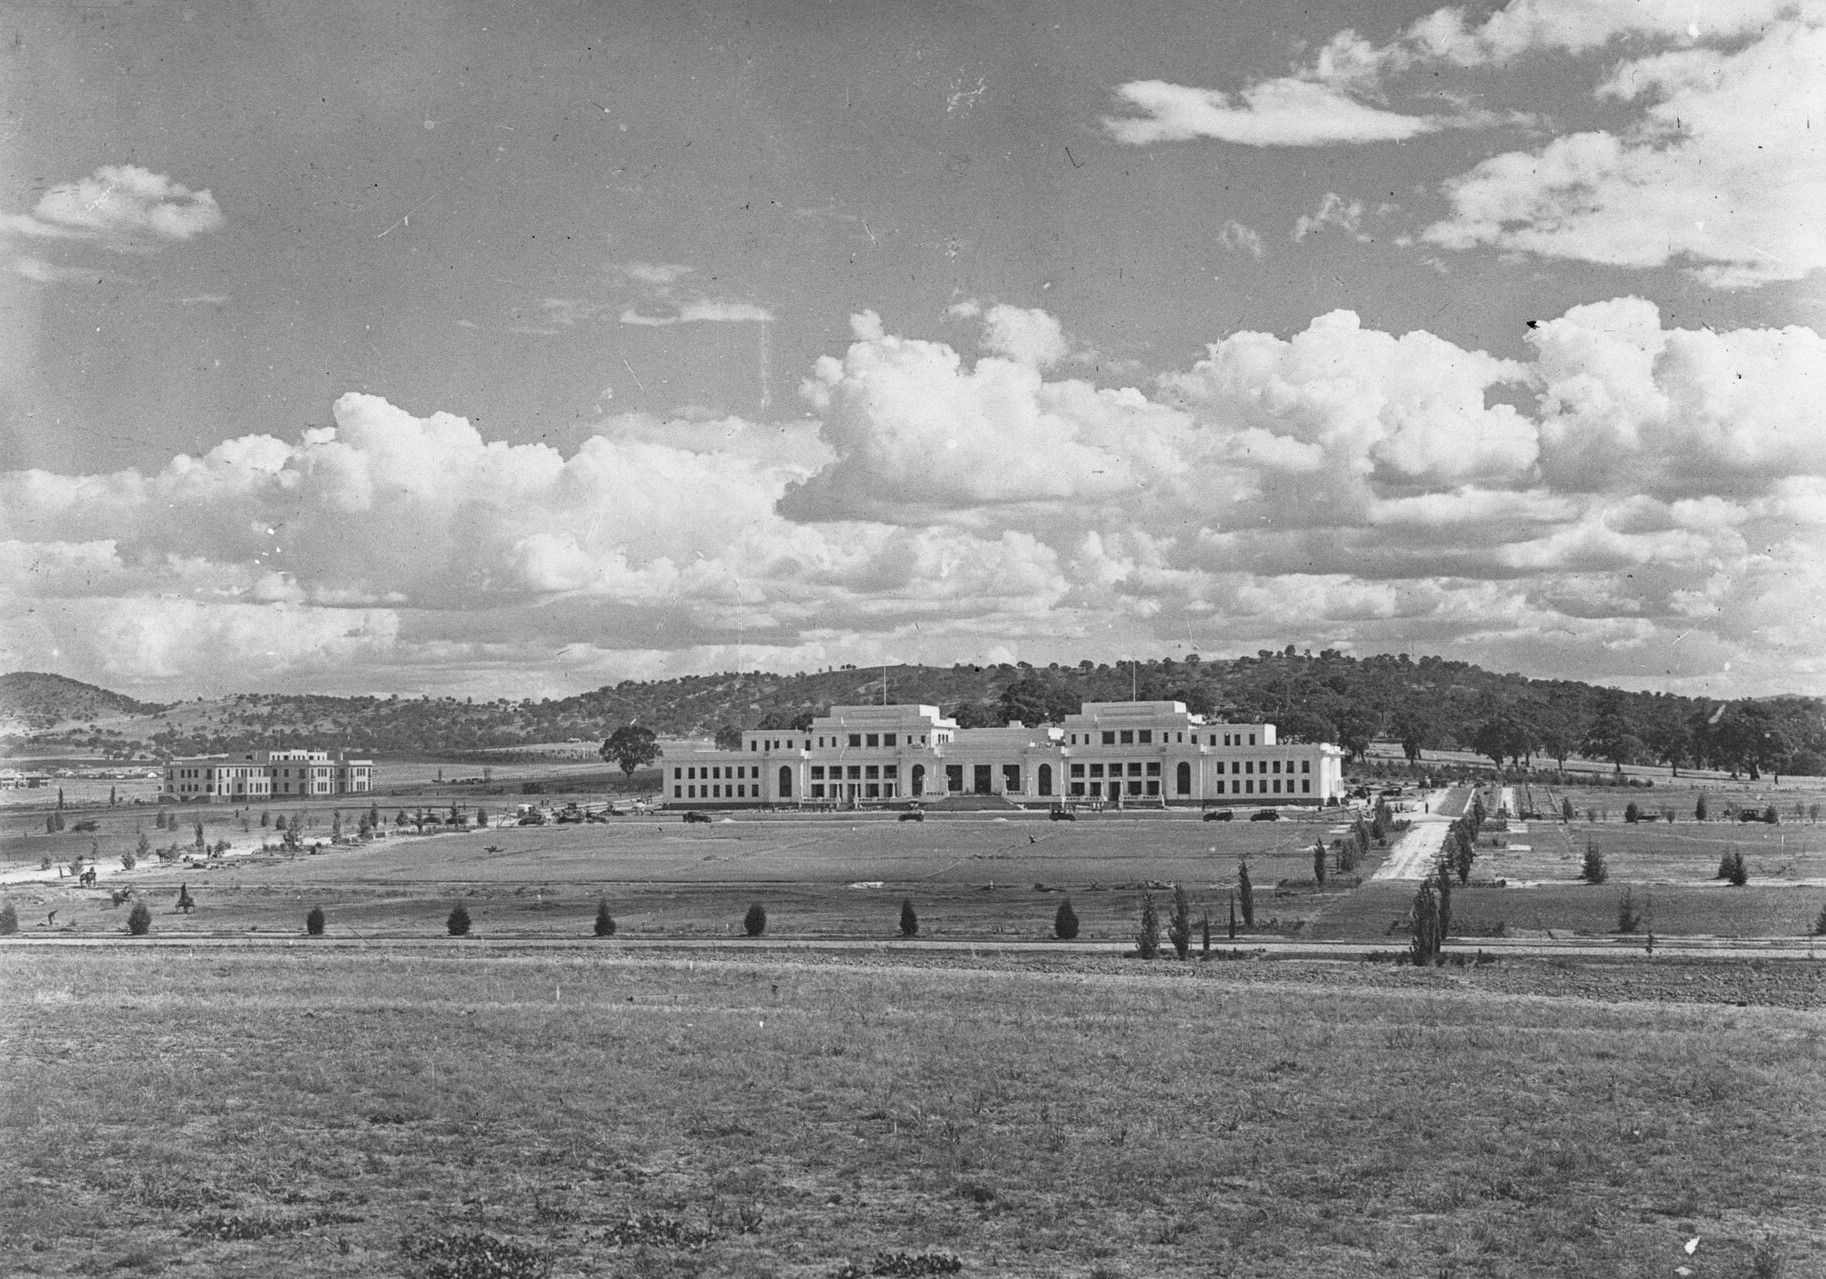 Parliament House in 1929 